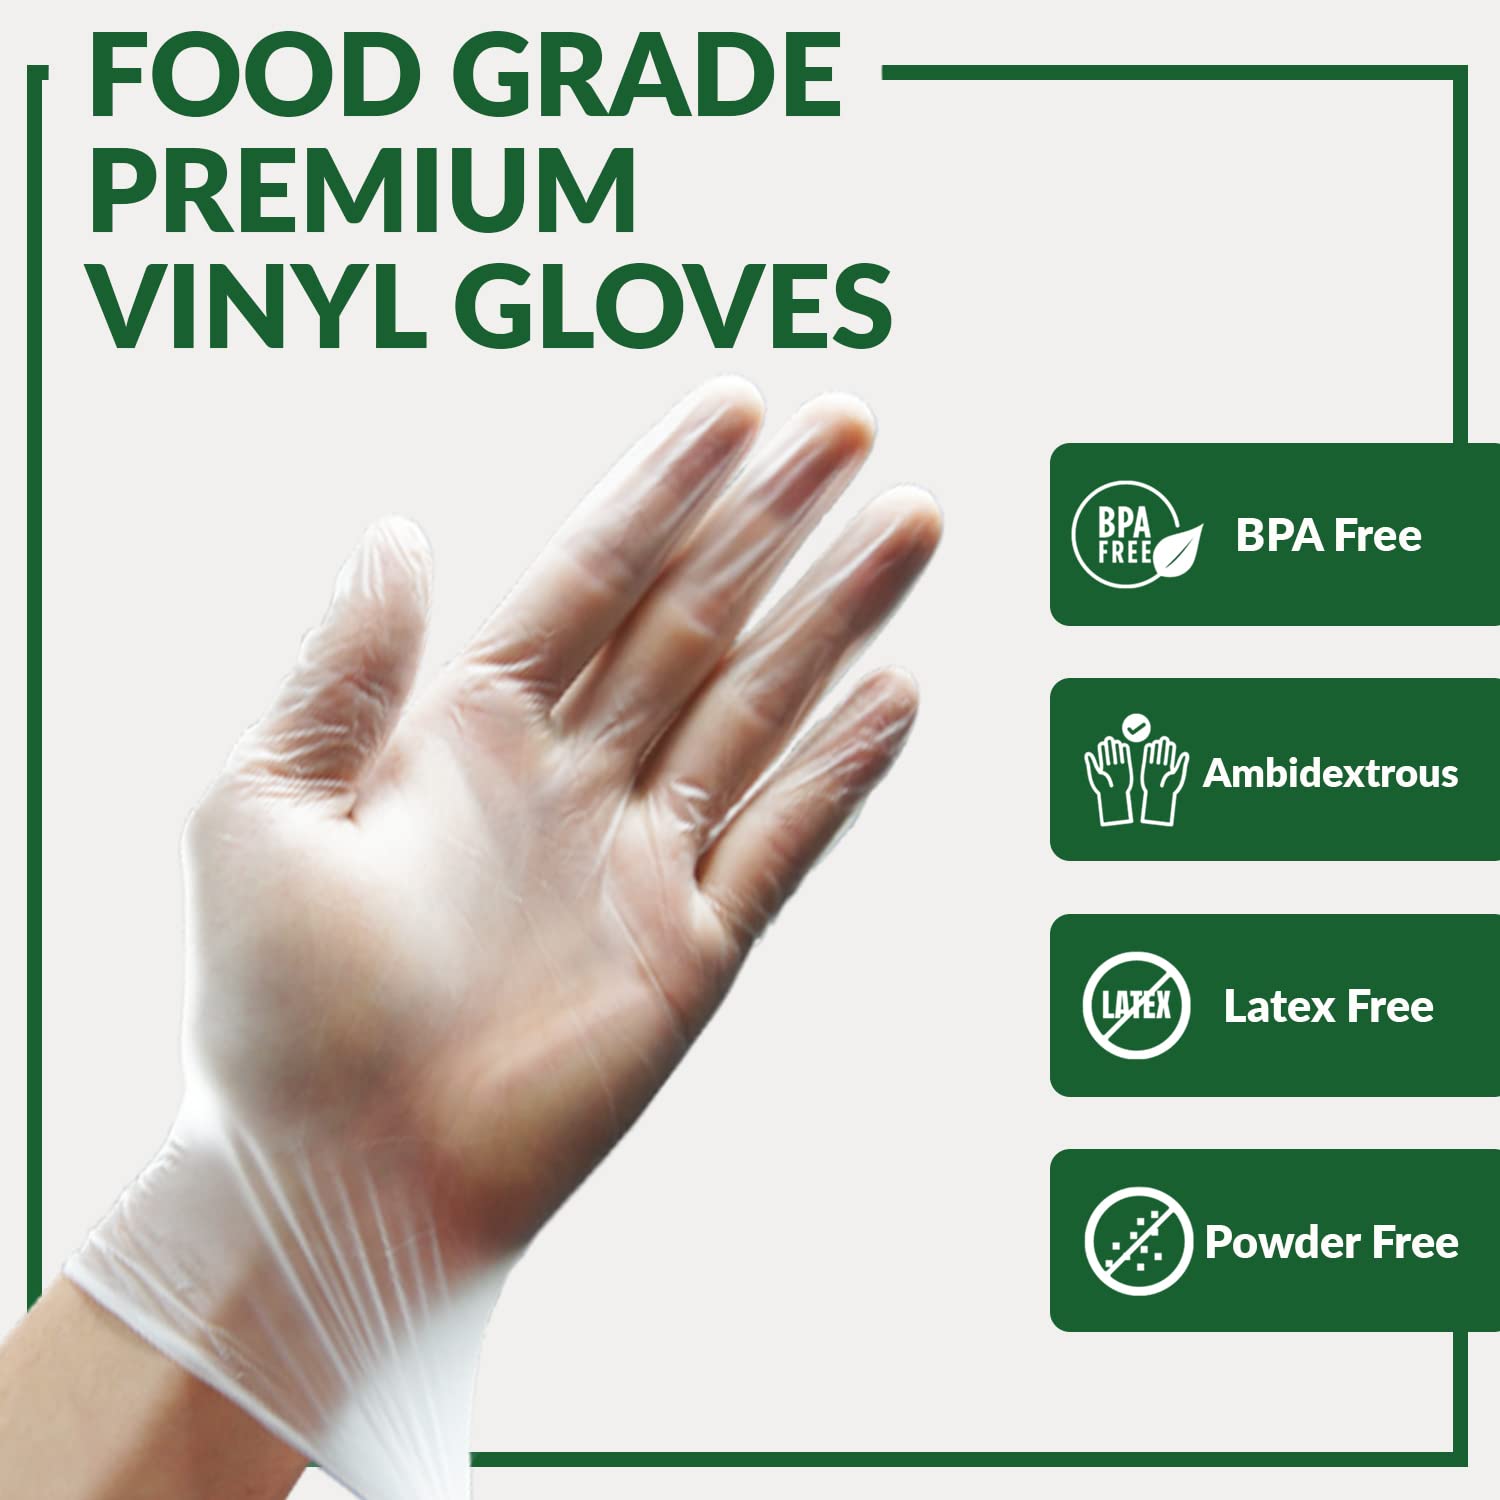 GORILLA SUPPLY Disposable Heavy Duty Vinyl Gloves Latex Free Powder Free, BPA Free Food Safe Grade Disposable Glove, Large L, 1000 Count